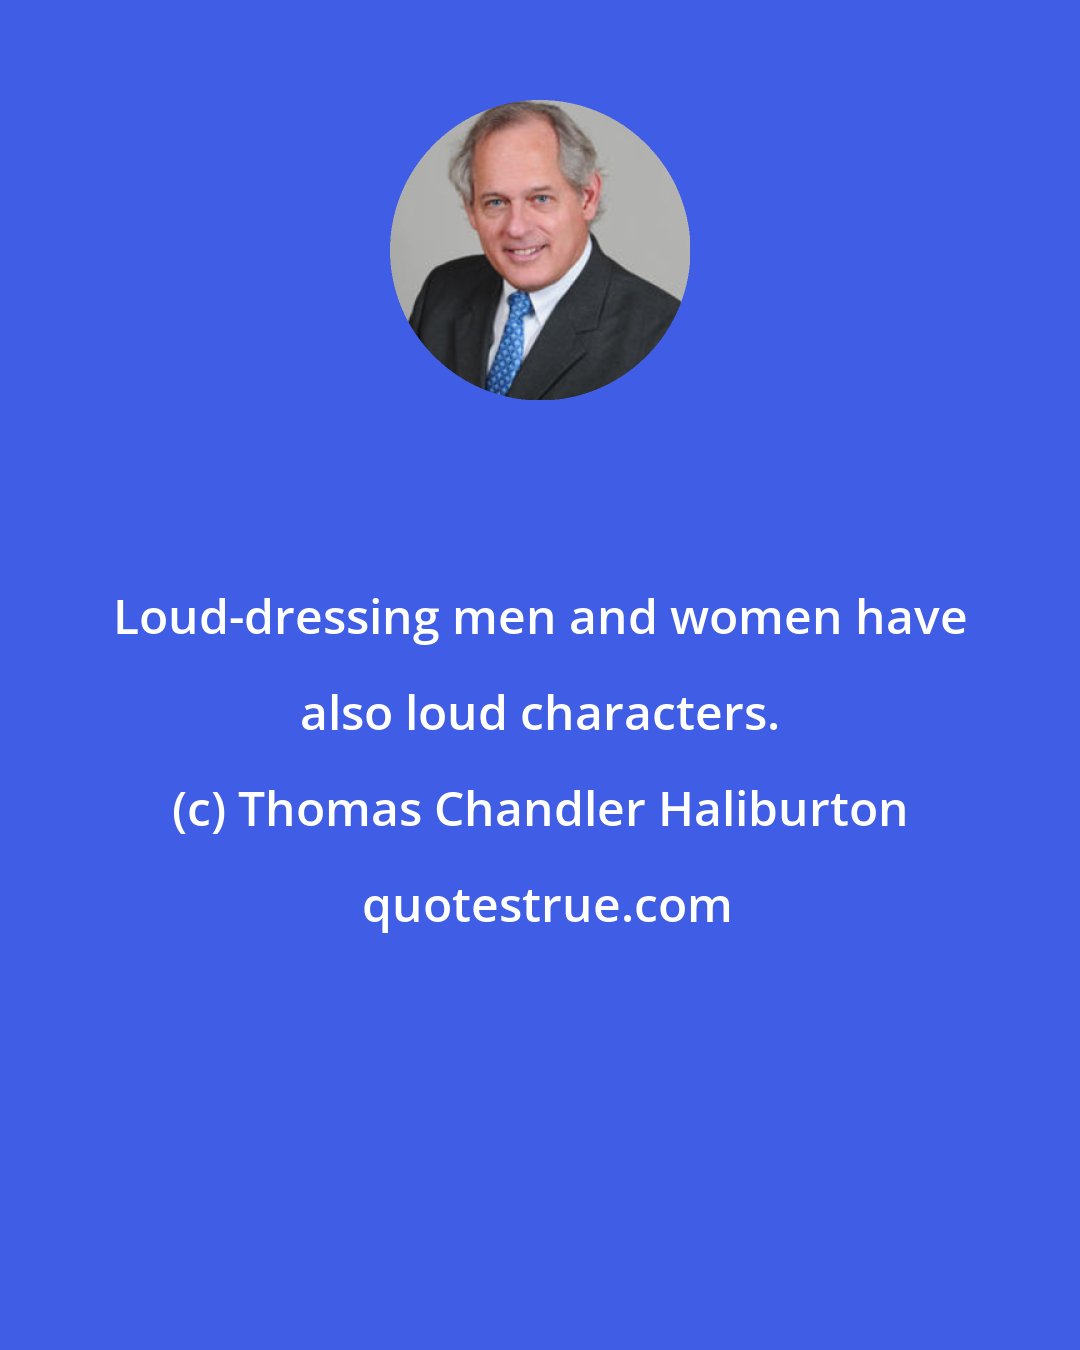 Thomas Chandler Haliburton: Loud-dressing men and women have also loud characters.